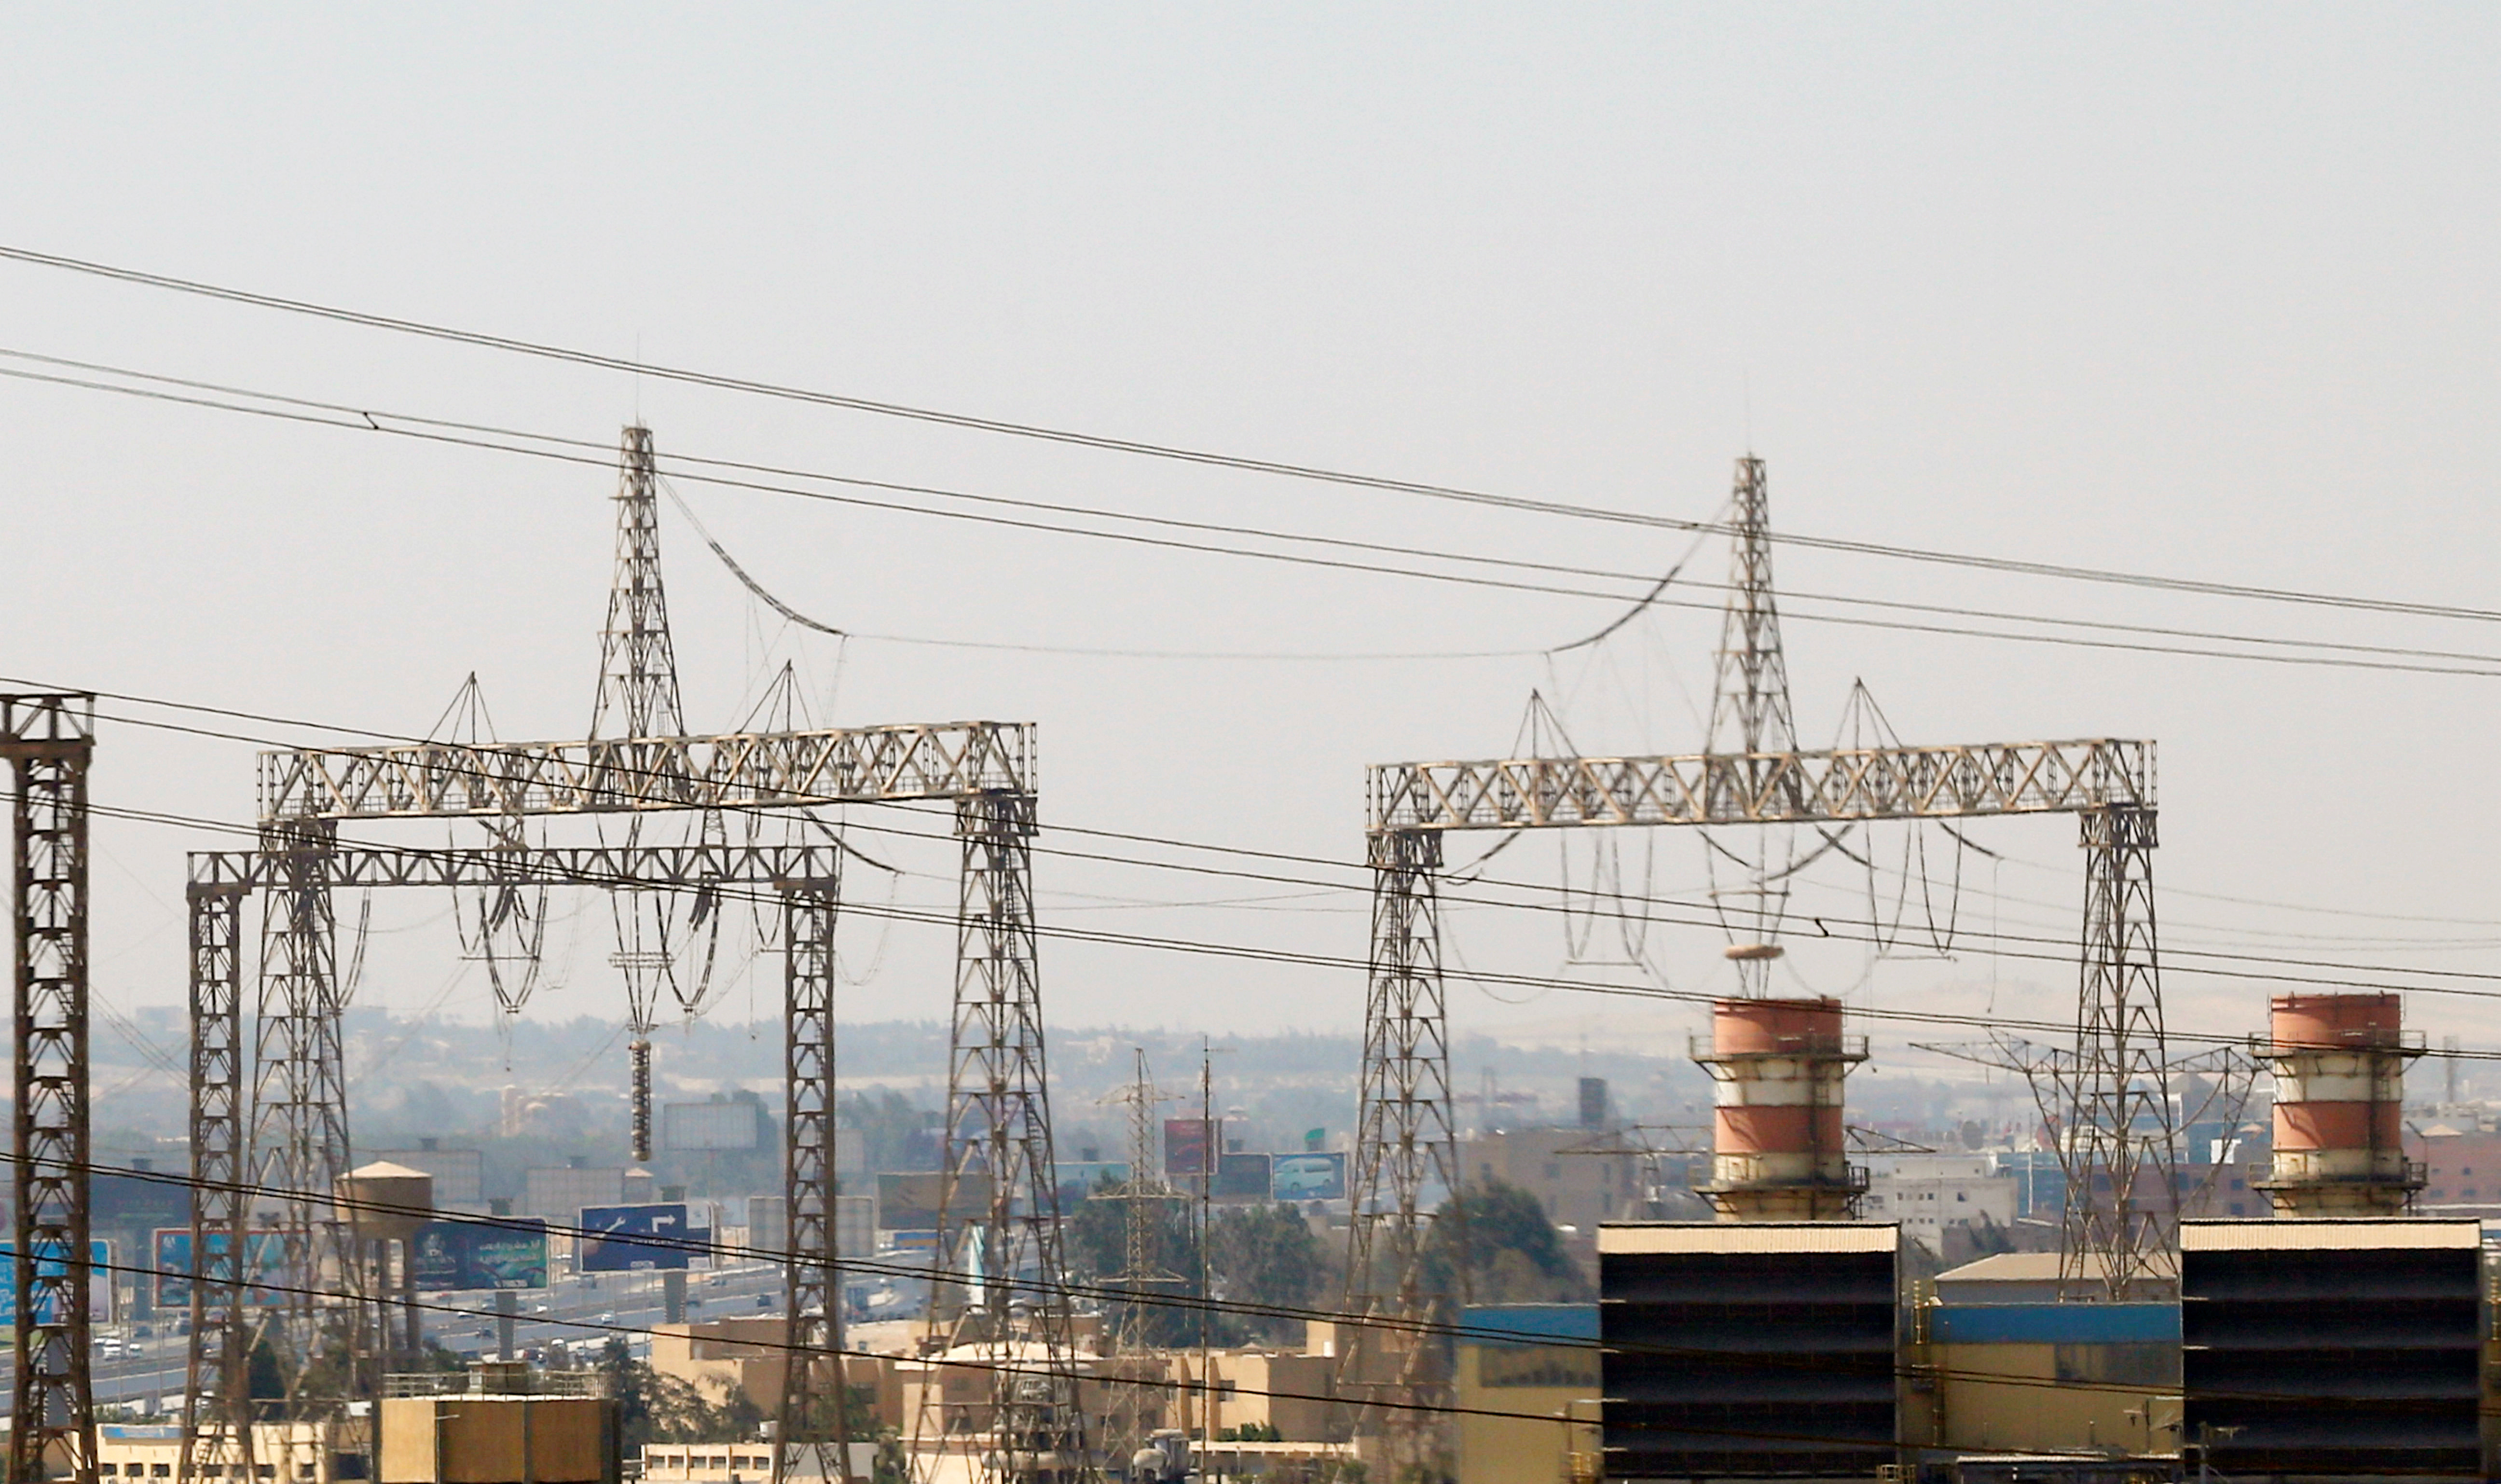 Electricity pylons and power transmission lines are seen along a road in Cairo